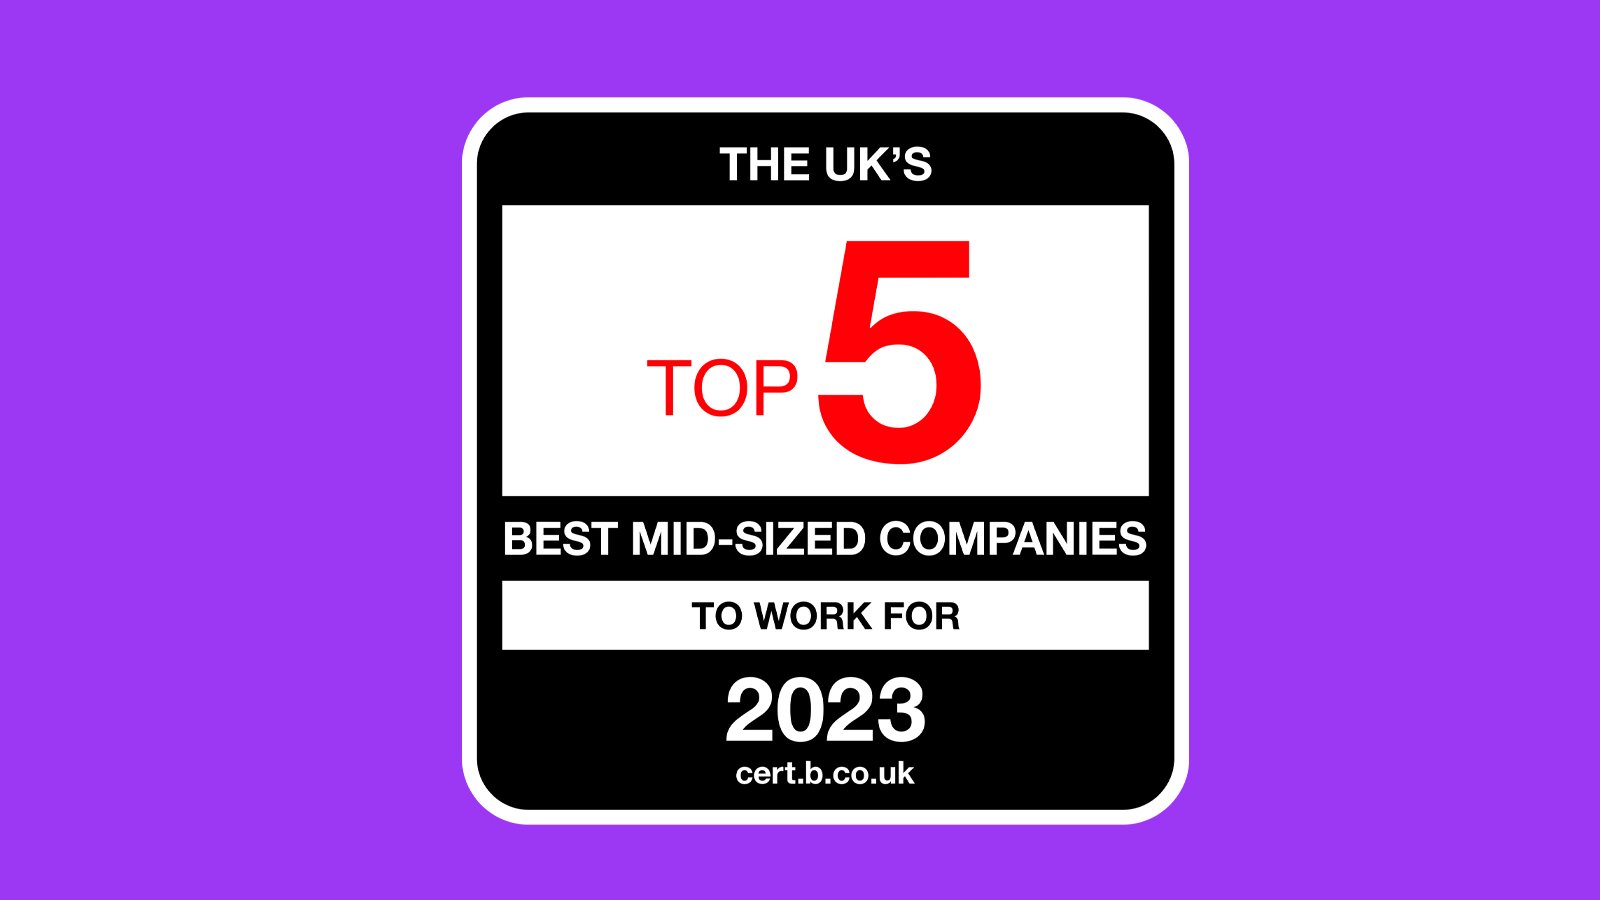 The UK's Top 5 Best Mid-sized Companies to Work For 2023